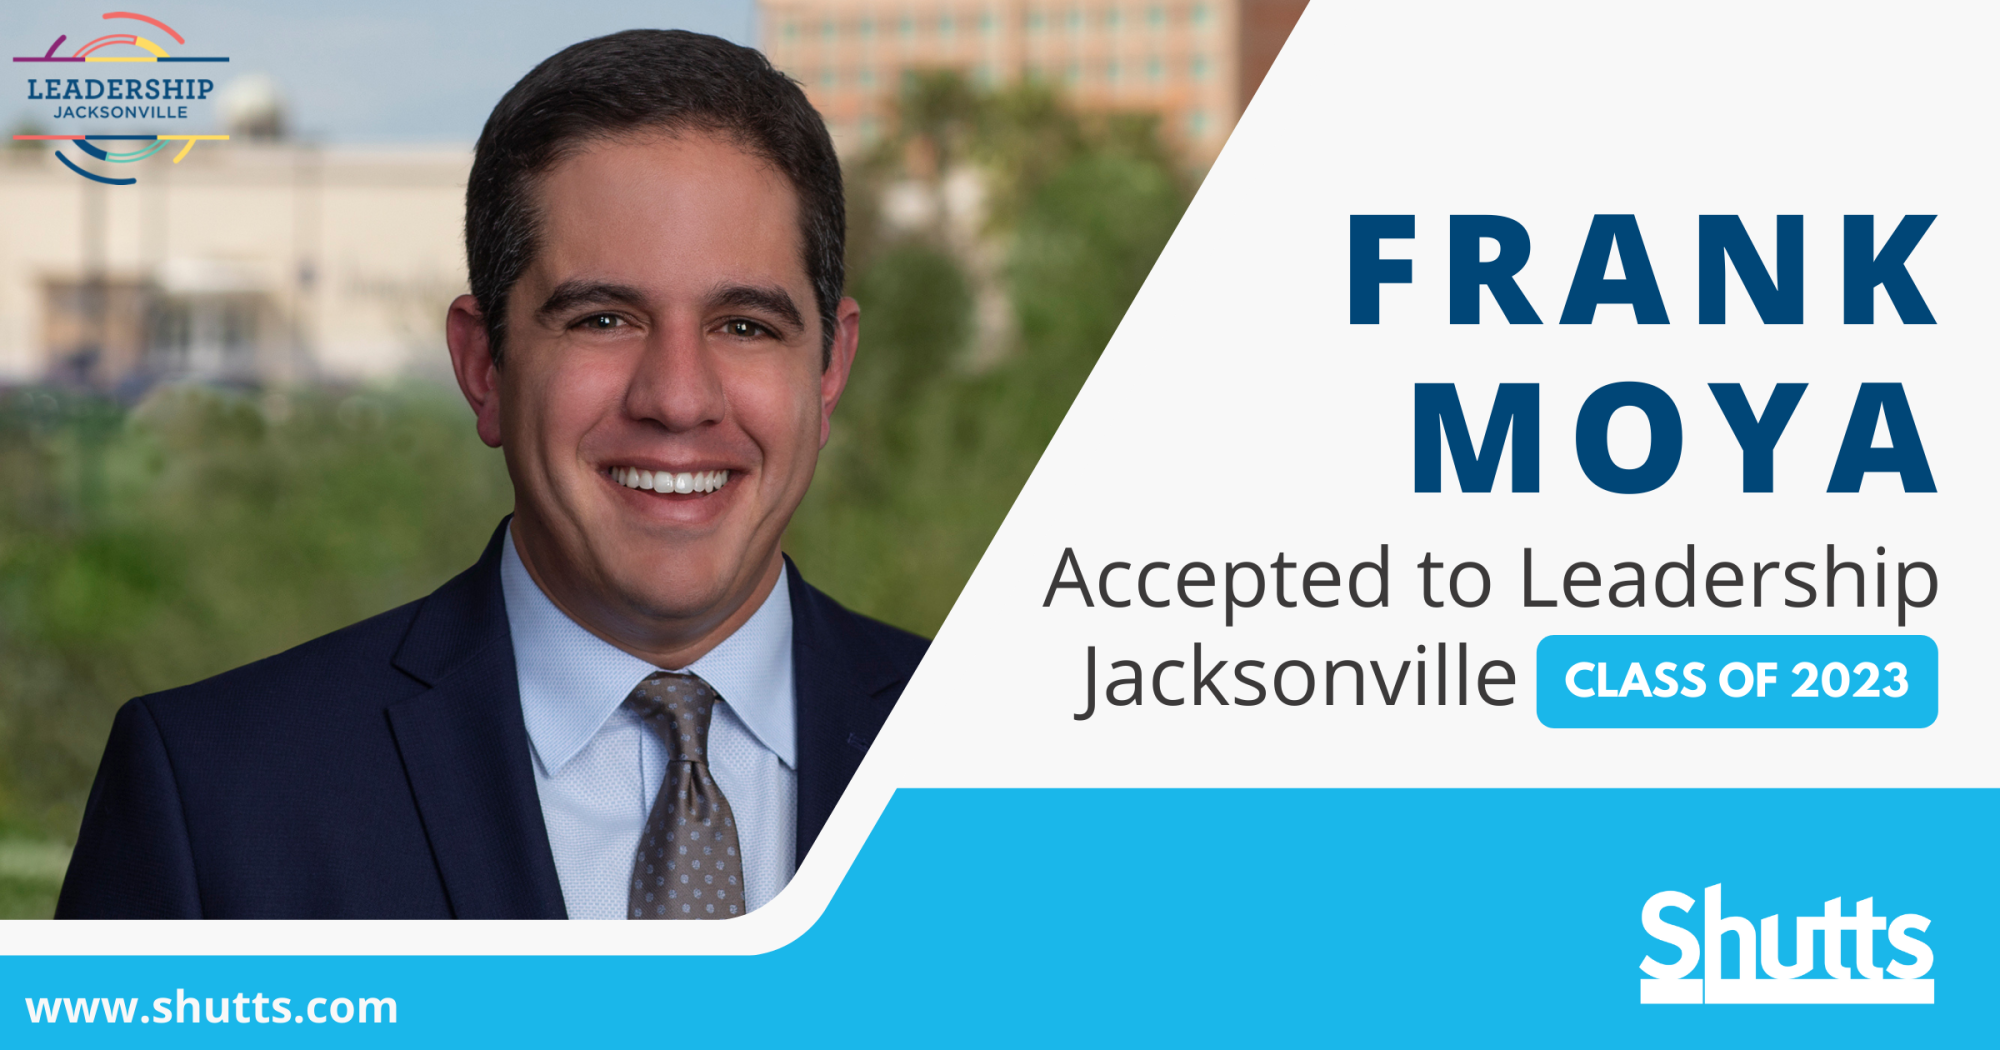 Frank Moya Accepted to Leadership Jacksonville Class of 2023